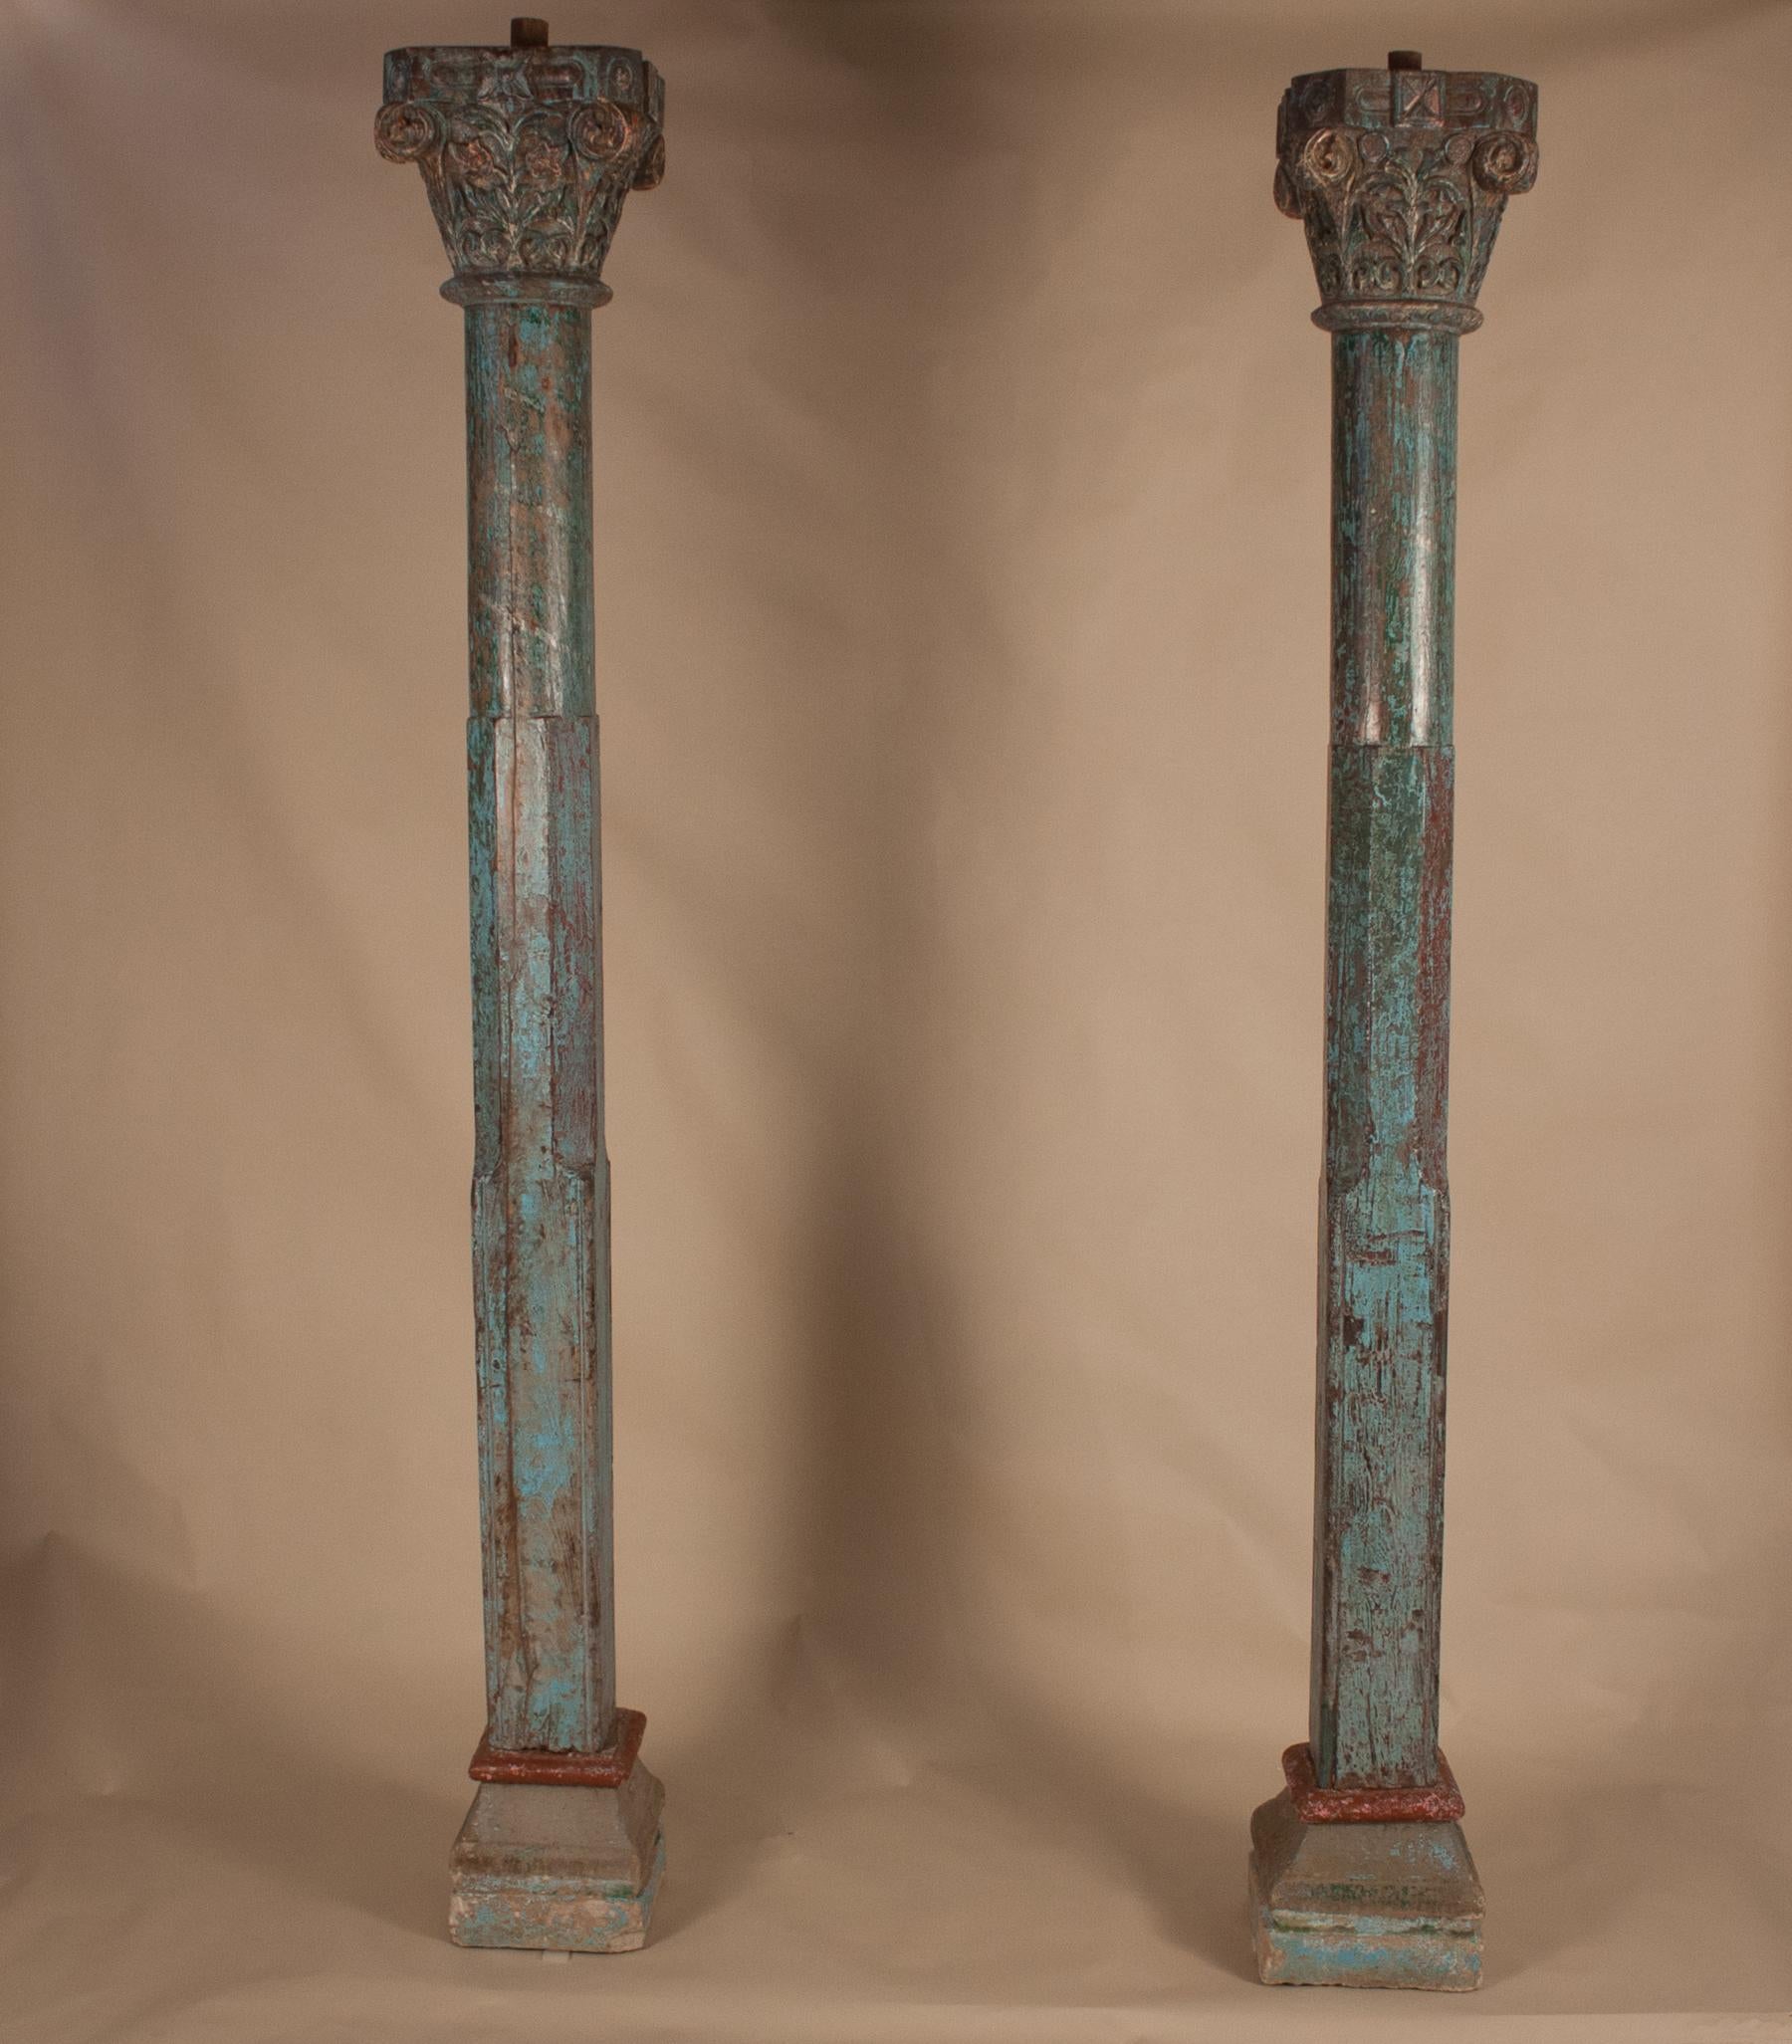 Beautiful pair of authentic teak wood columns from India, circa 1900. Colorful, yet subdued, the pillars have their original paint, a medley of blue and green, with hints of deep red. The Corinthian capitals are hand-carved with a floral design, and